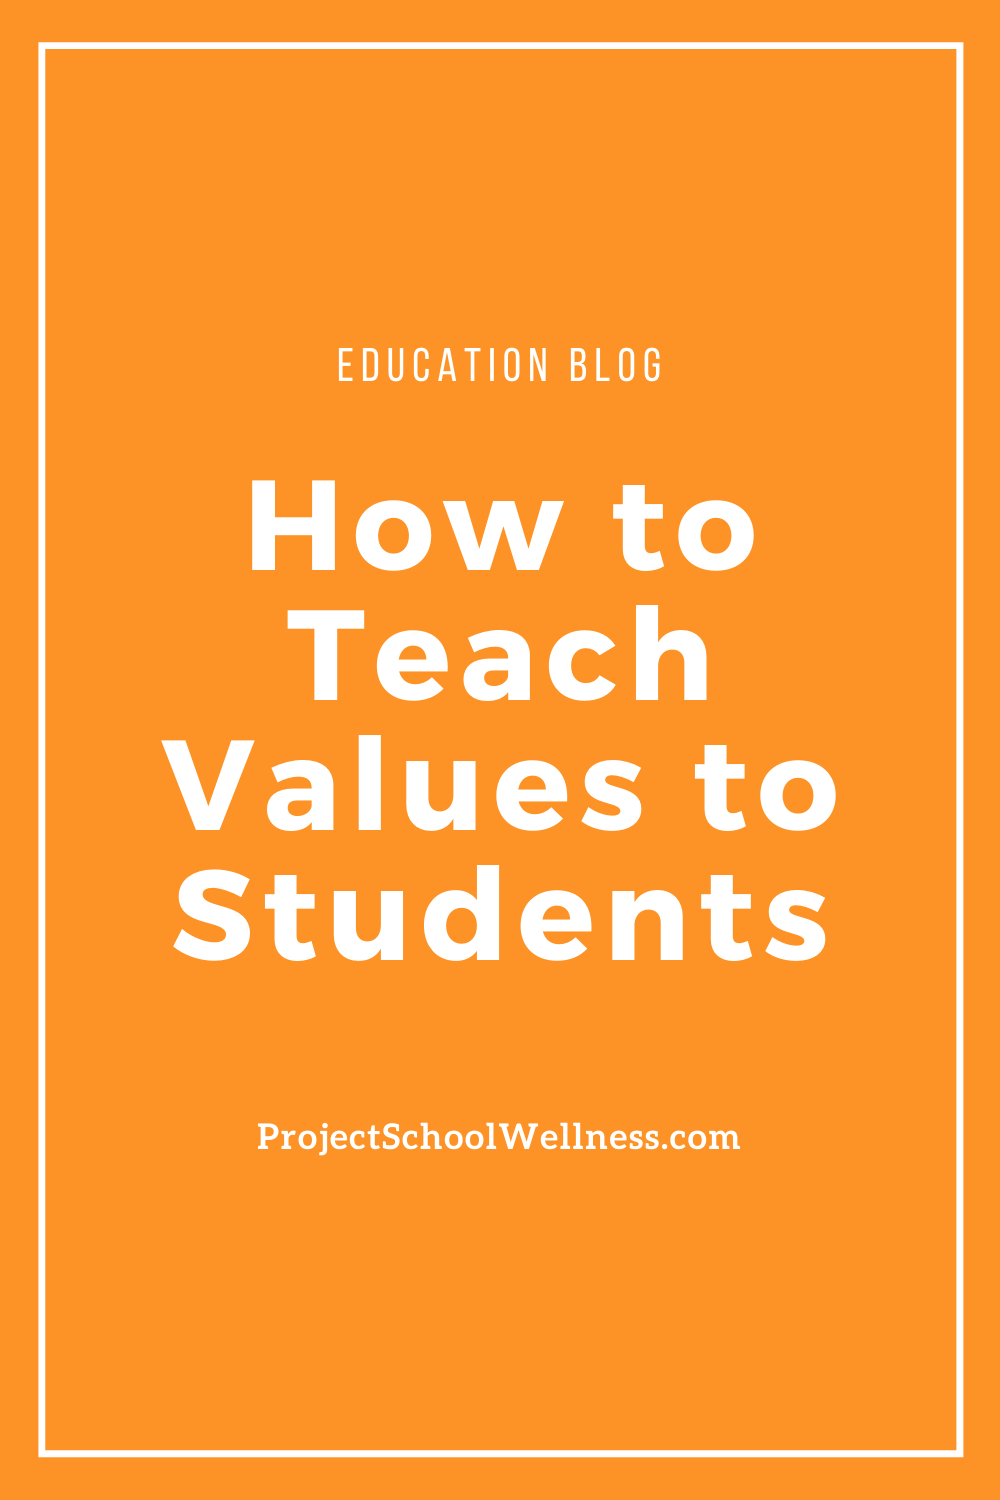 Teaching Values to Students in Health Education - How I teach students to identify their core values